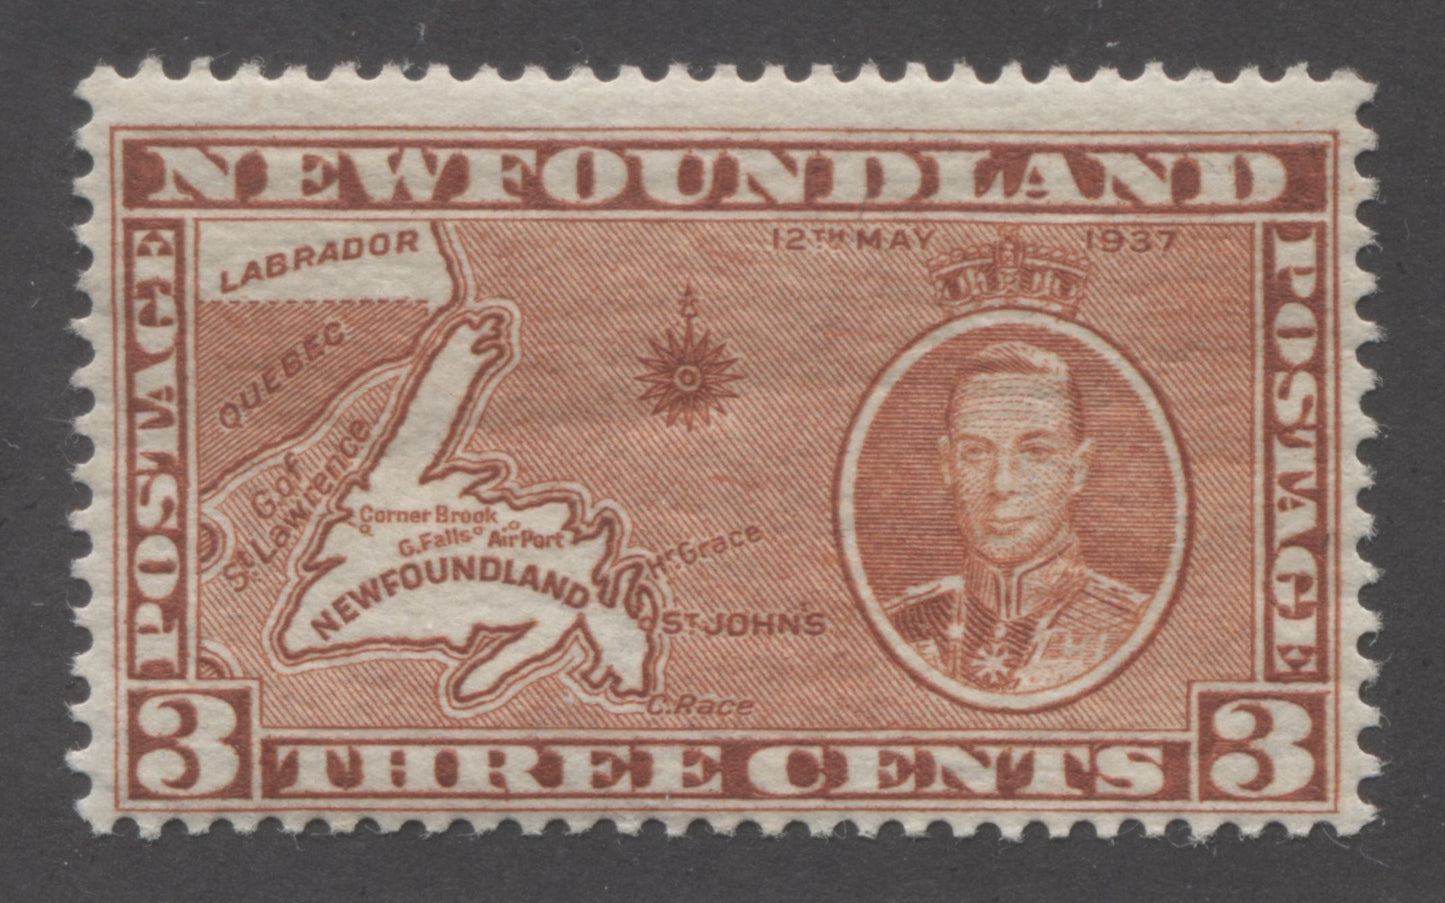 Newfoundland #234h 3c Orange Brown Newfoundland Map, Die 2, 1937 Long Coronation Issue, A Fine Mint NH Example With Re-Entry in "NTS" of Cents, Comb Perf. 13.4